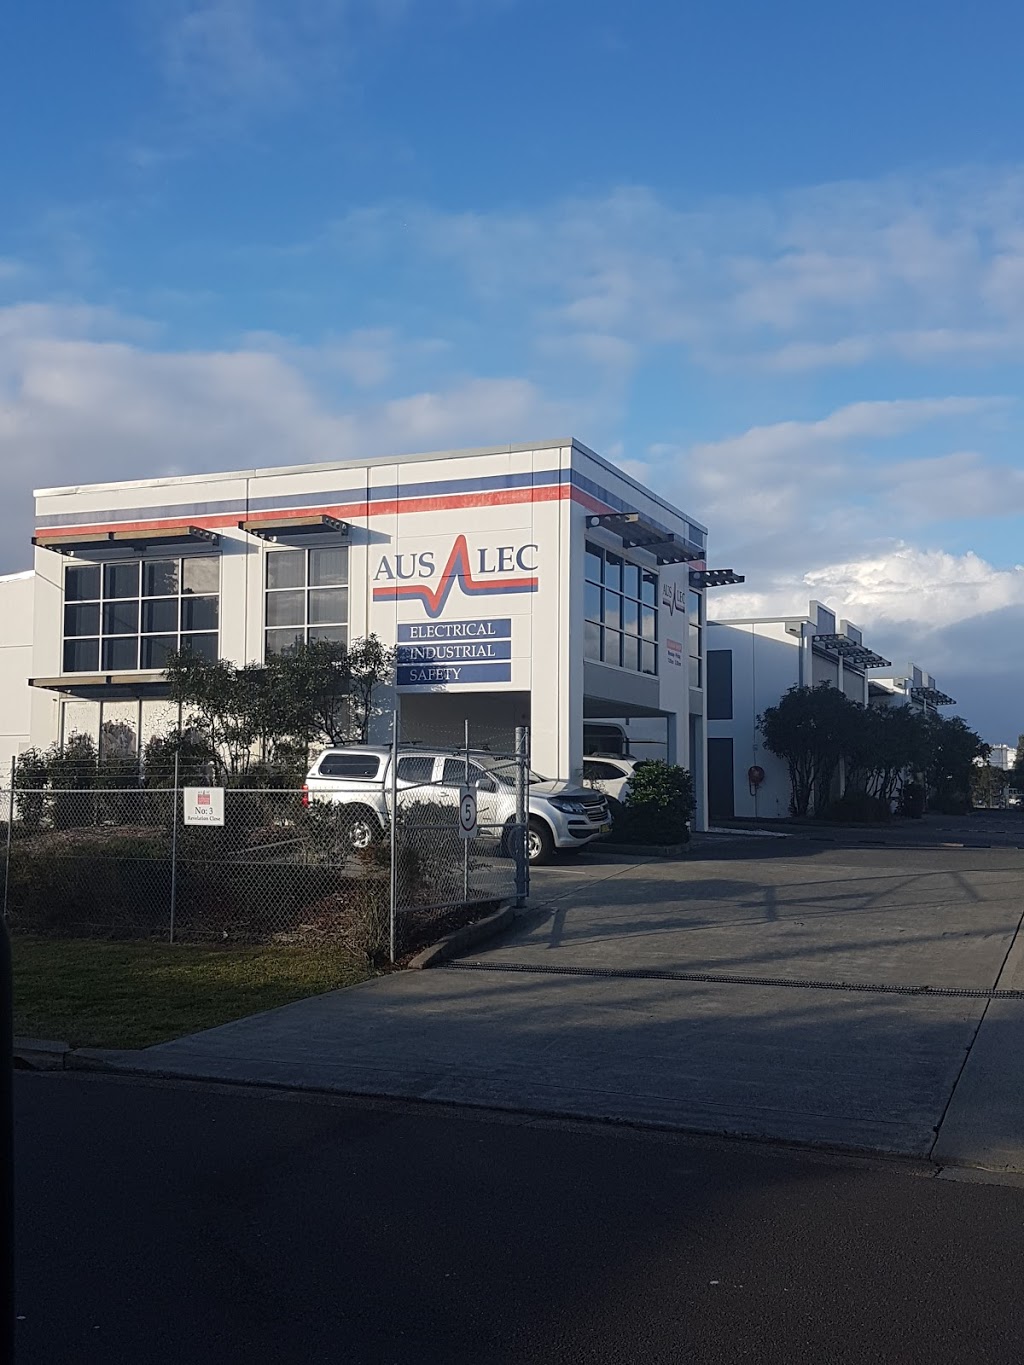 AUSLEC NEWCASTLE | 3 Revelation Cl, Tighes Hill NSW 2297, Australia | Phone: (02) 4961 2022